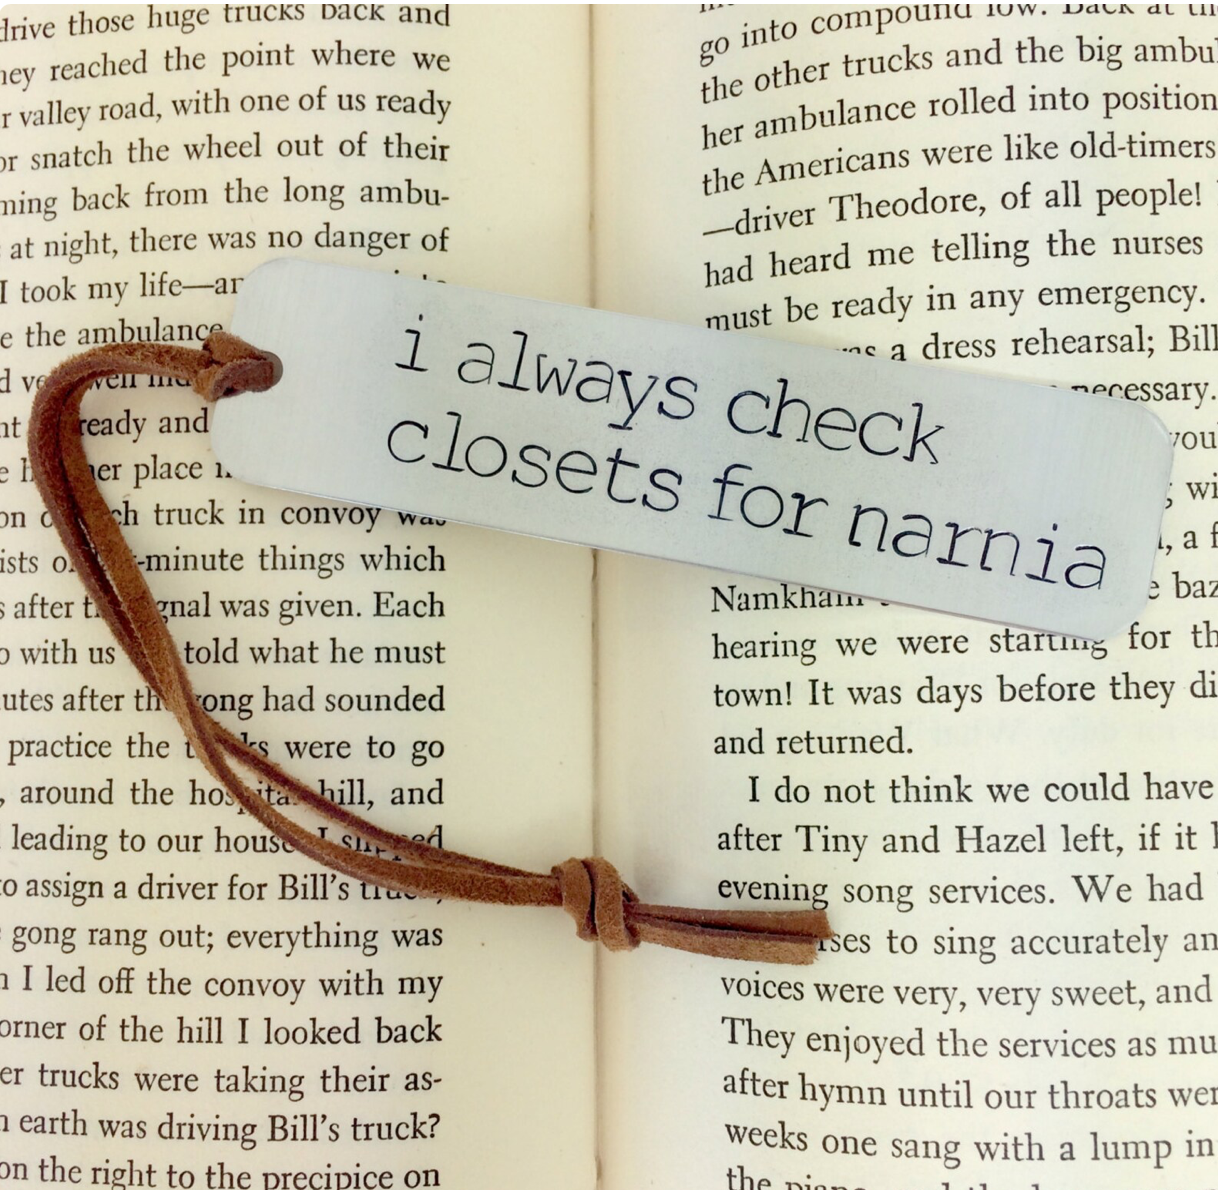 Silver bookmark that says "I always check closets for Narnia"